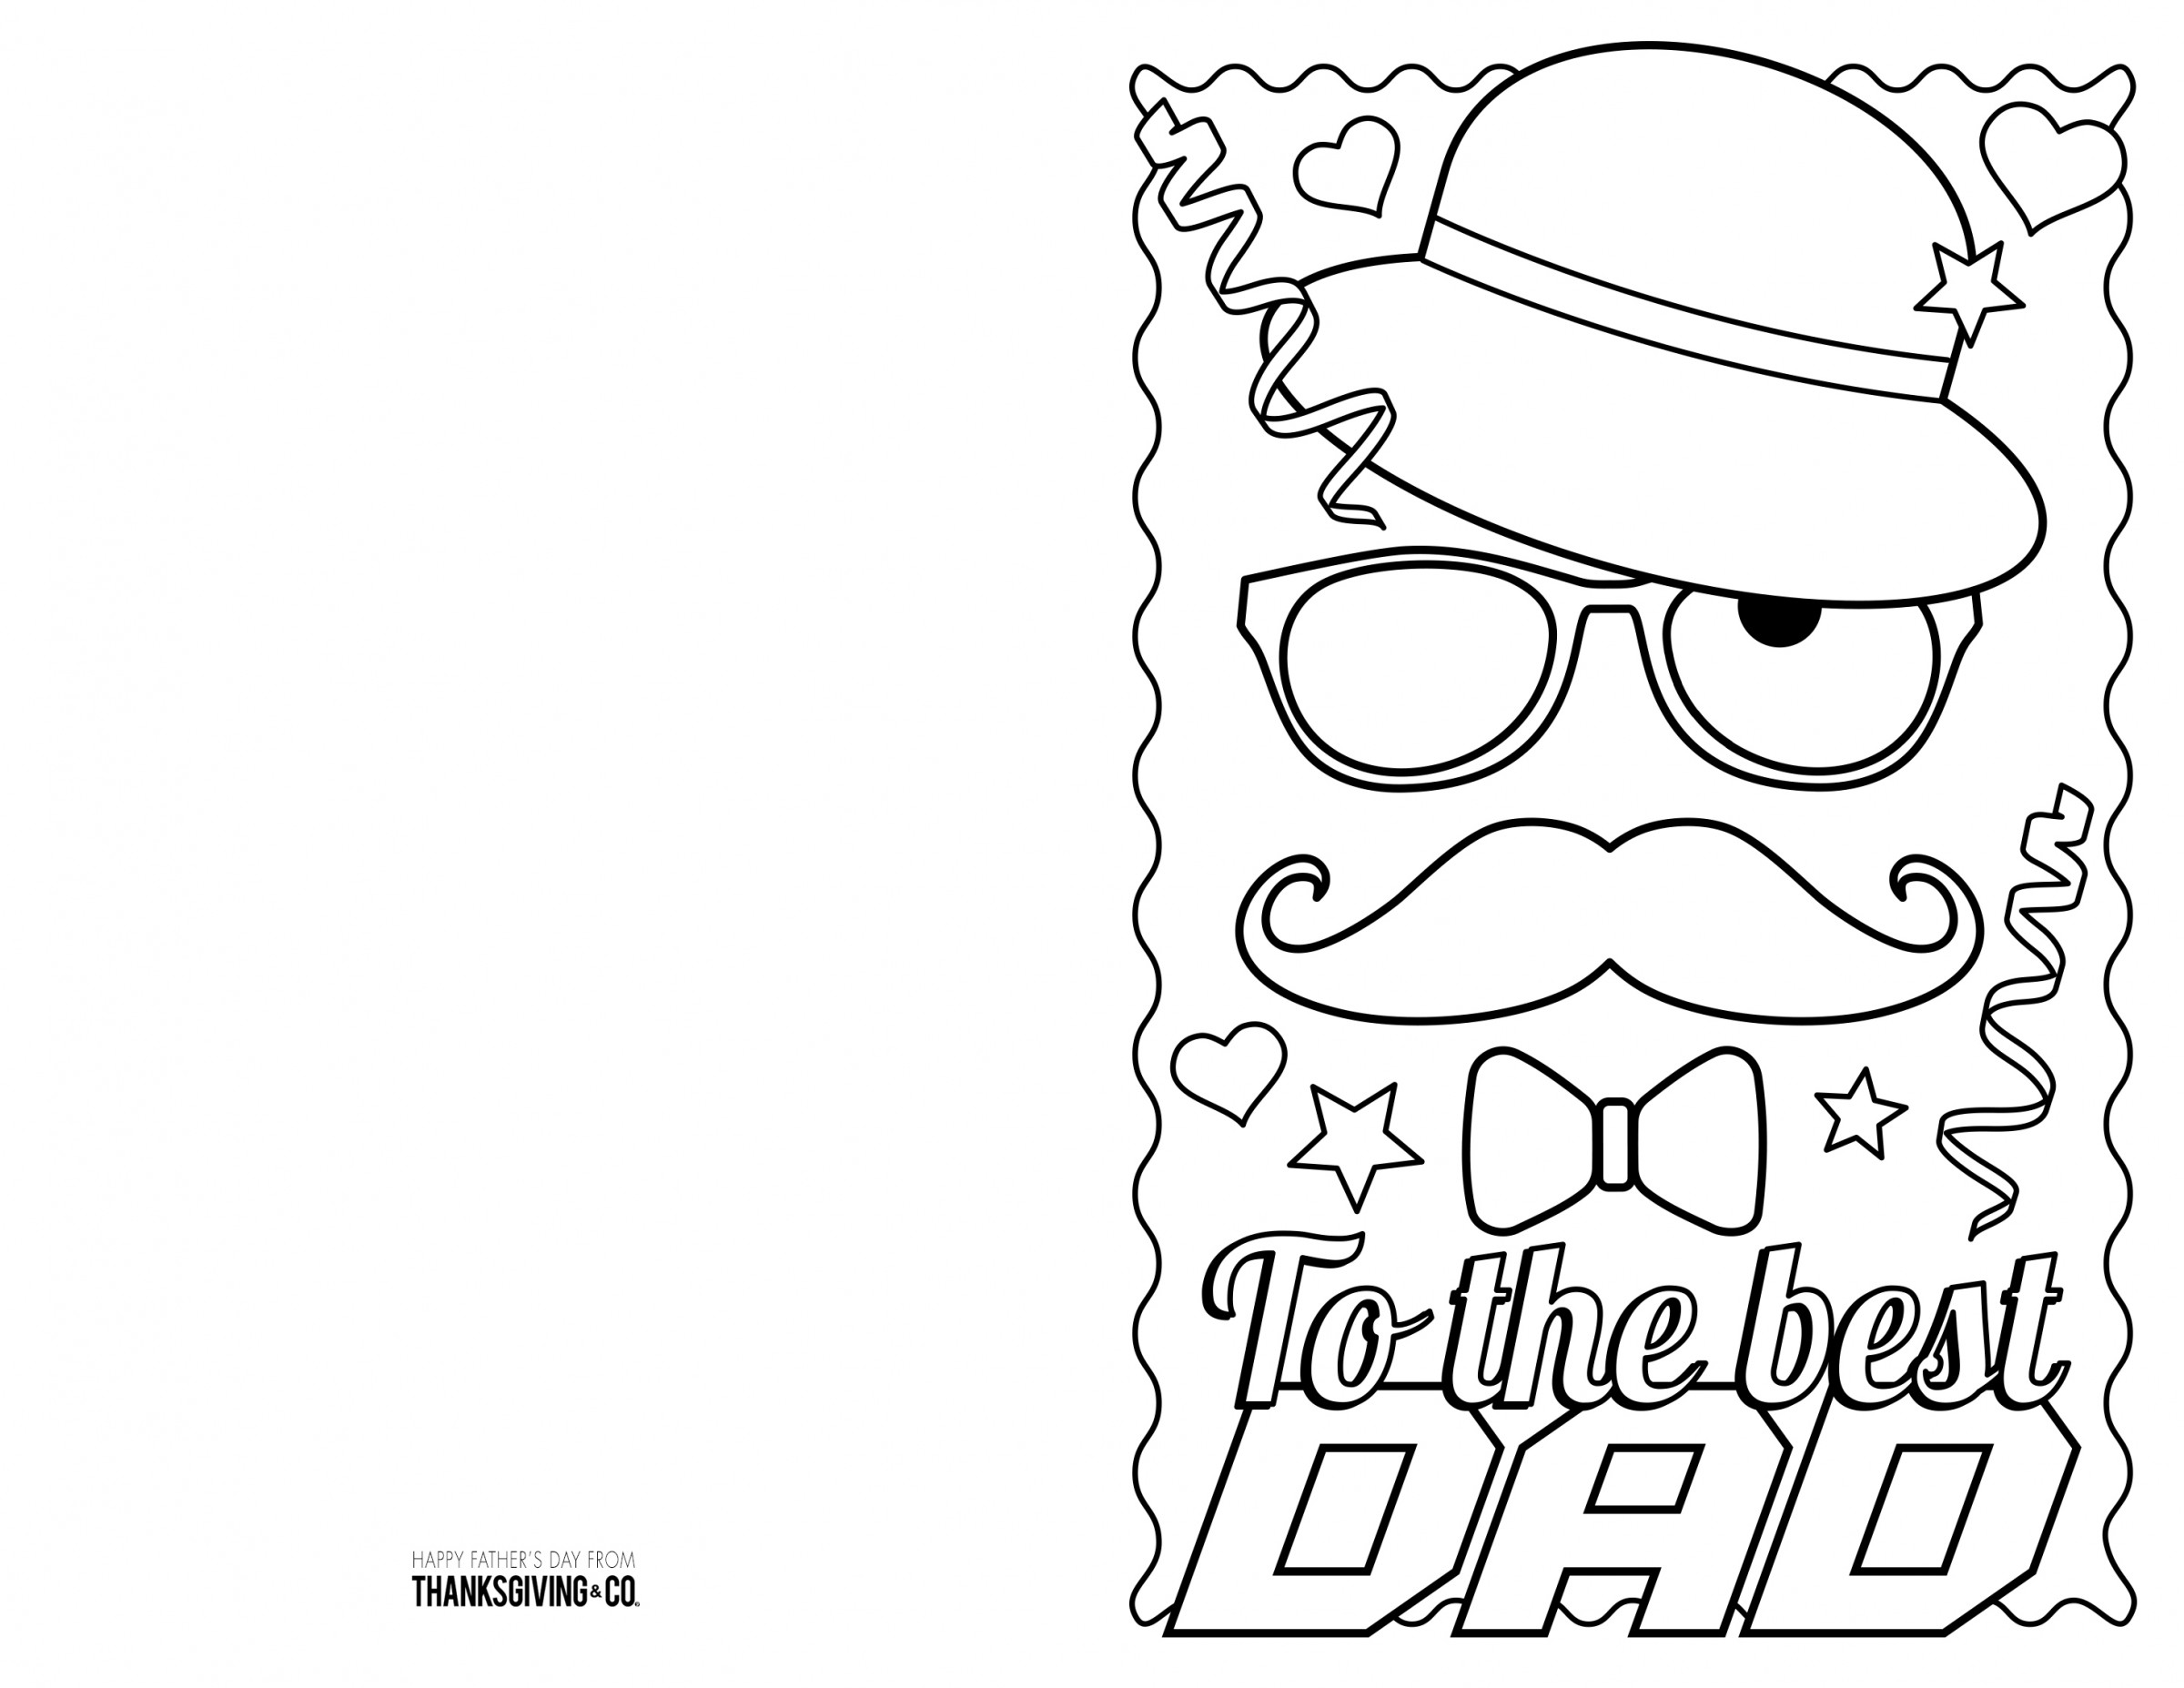 4 free printable Father's Day cards to color